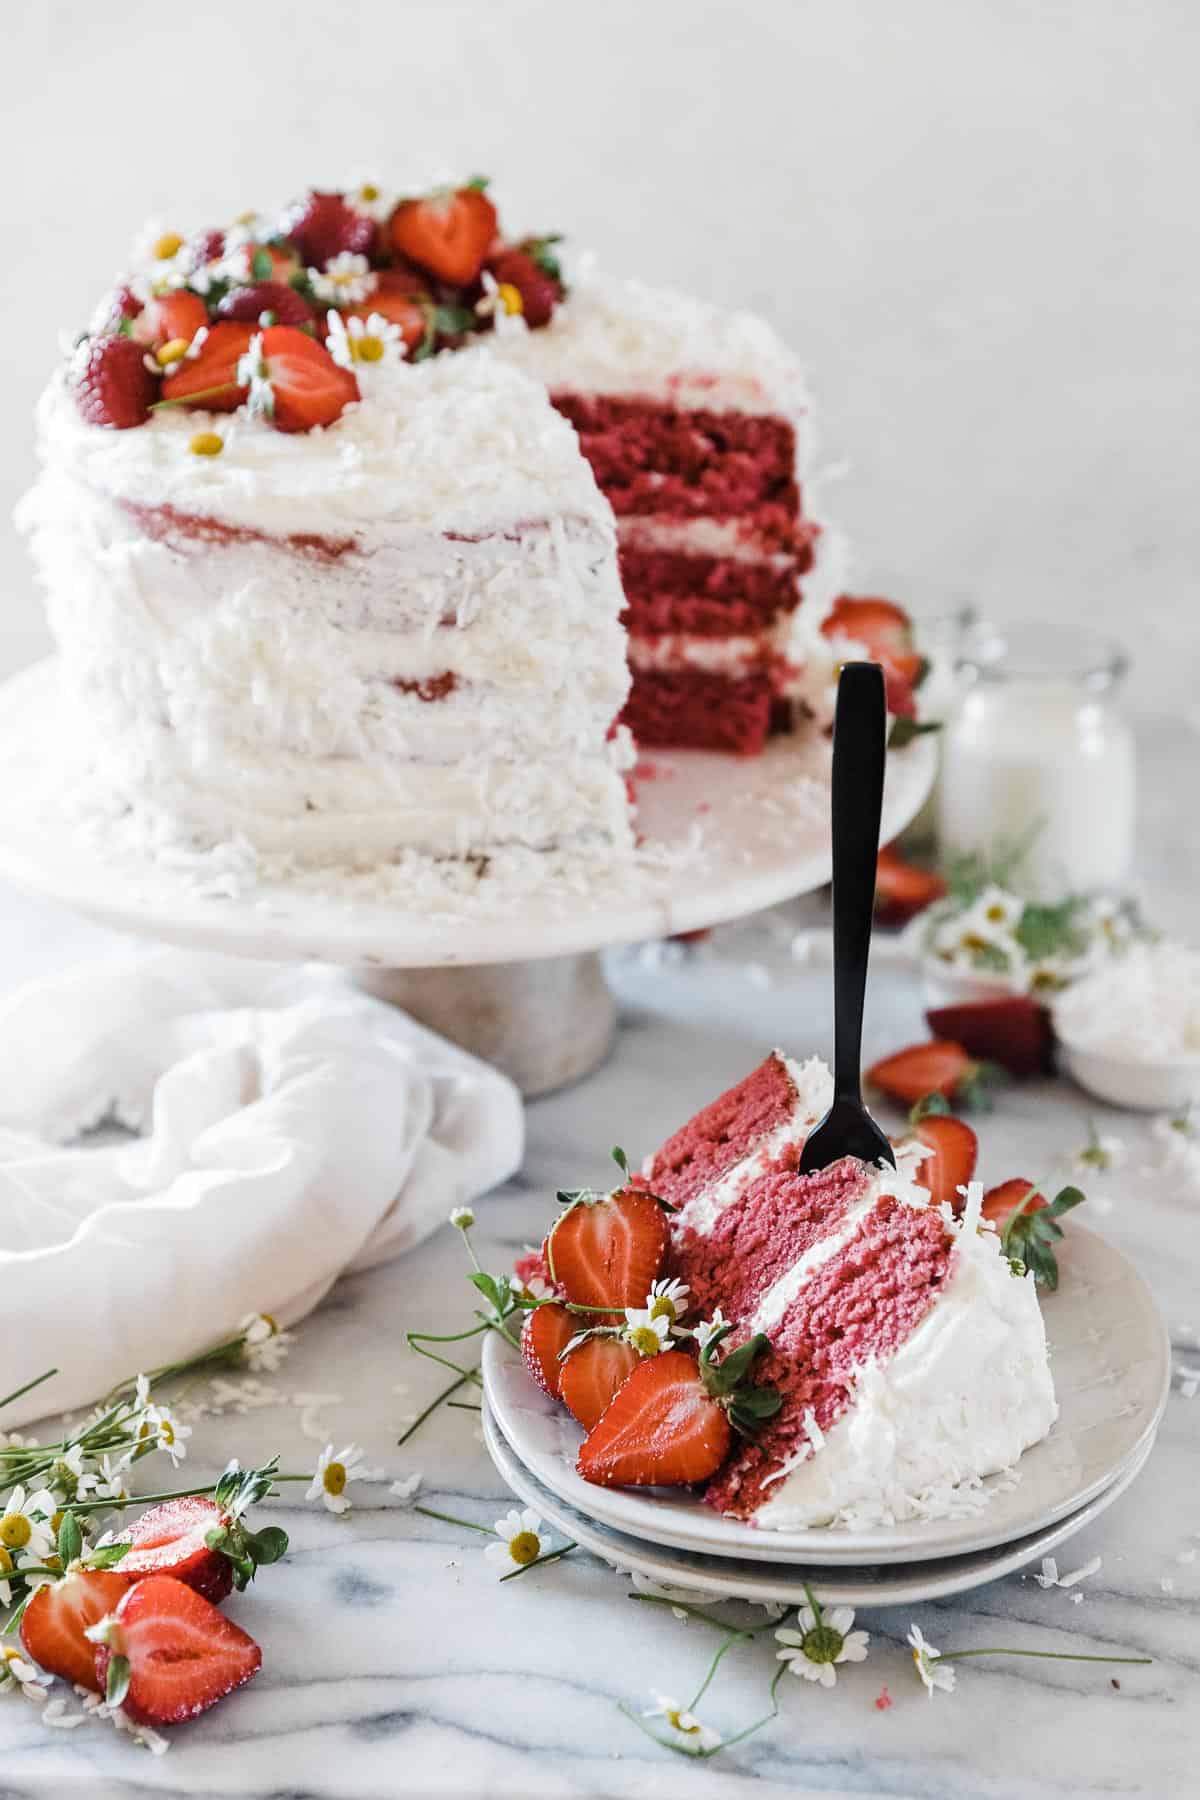 A slice of strawberry coconut cake on a small plate, with a full cake in the background.